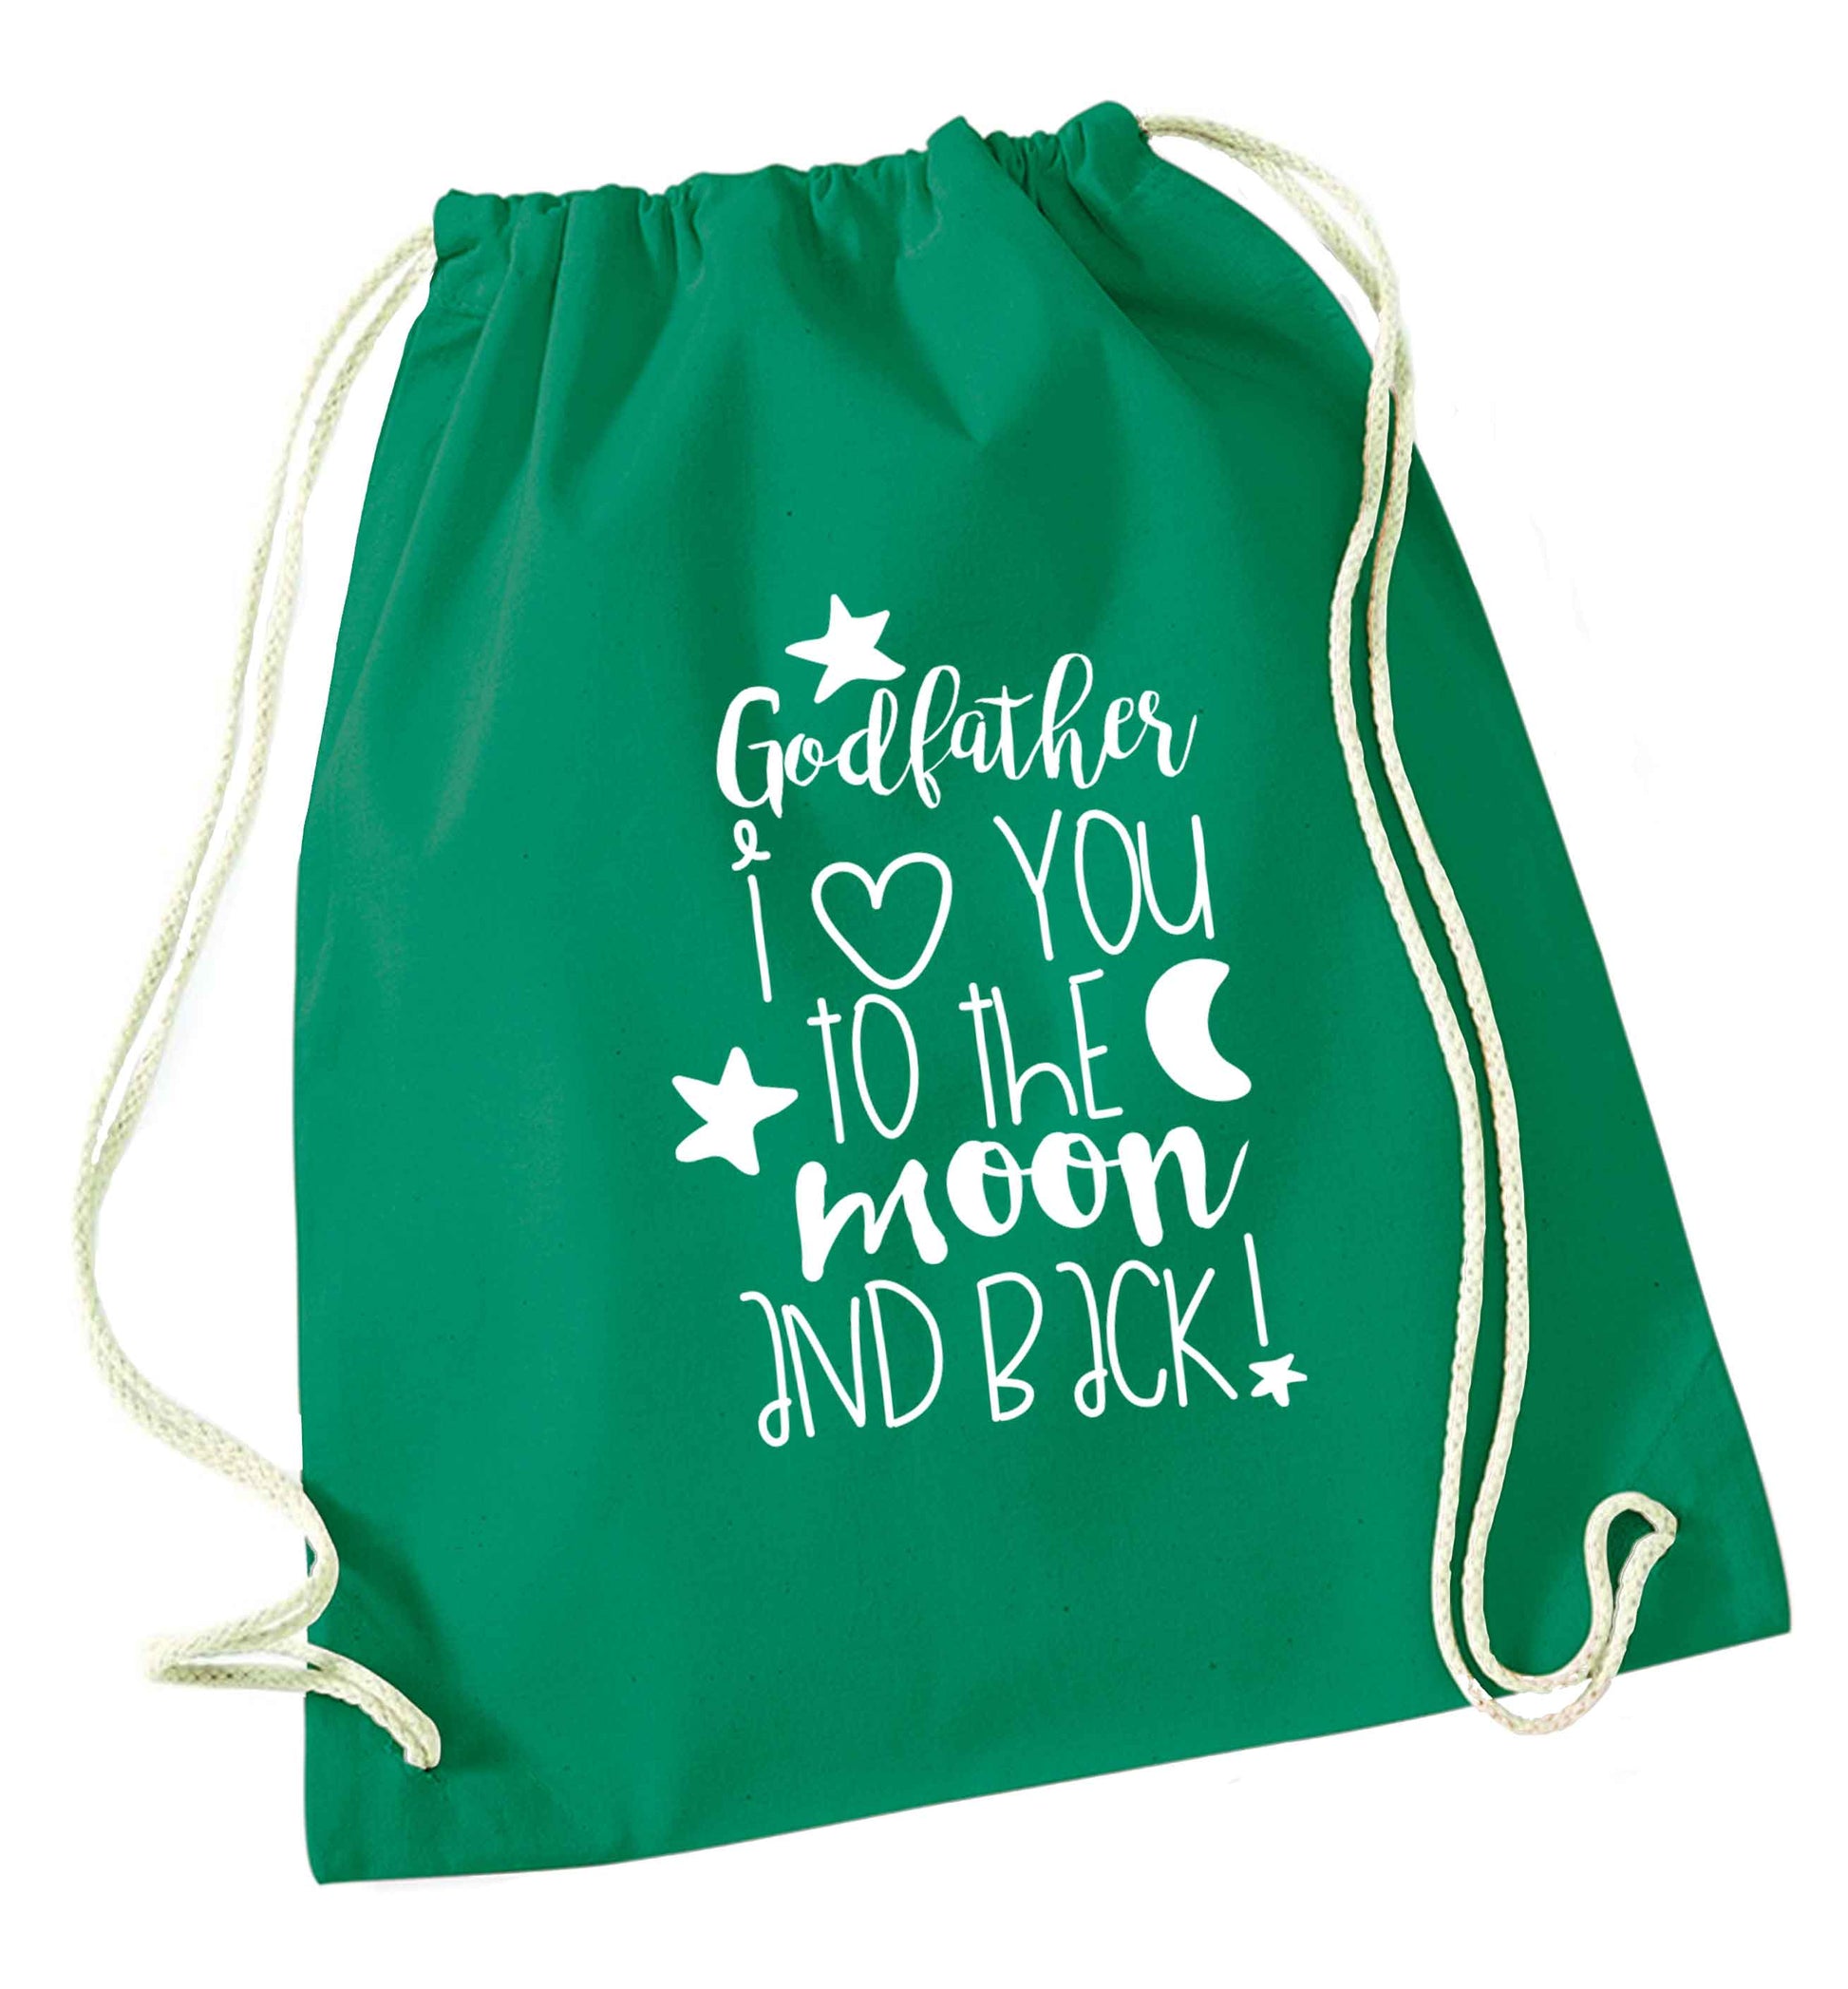 Godfather I love you to the moon and back green drawstring bag